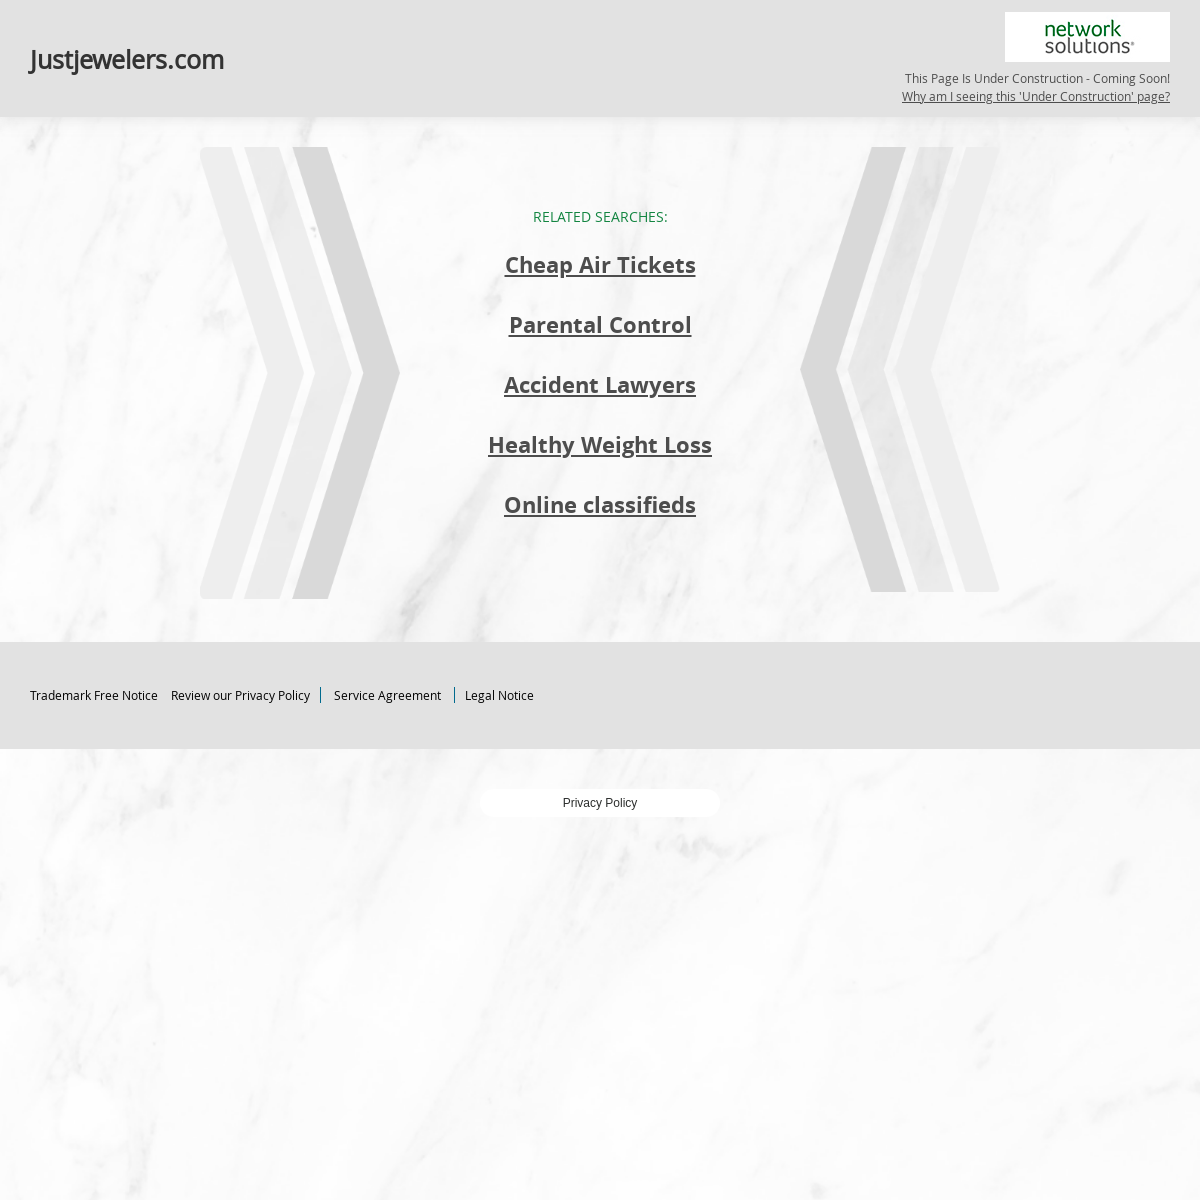 A complete backup of justjewelers.com